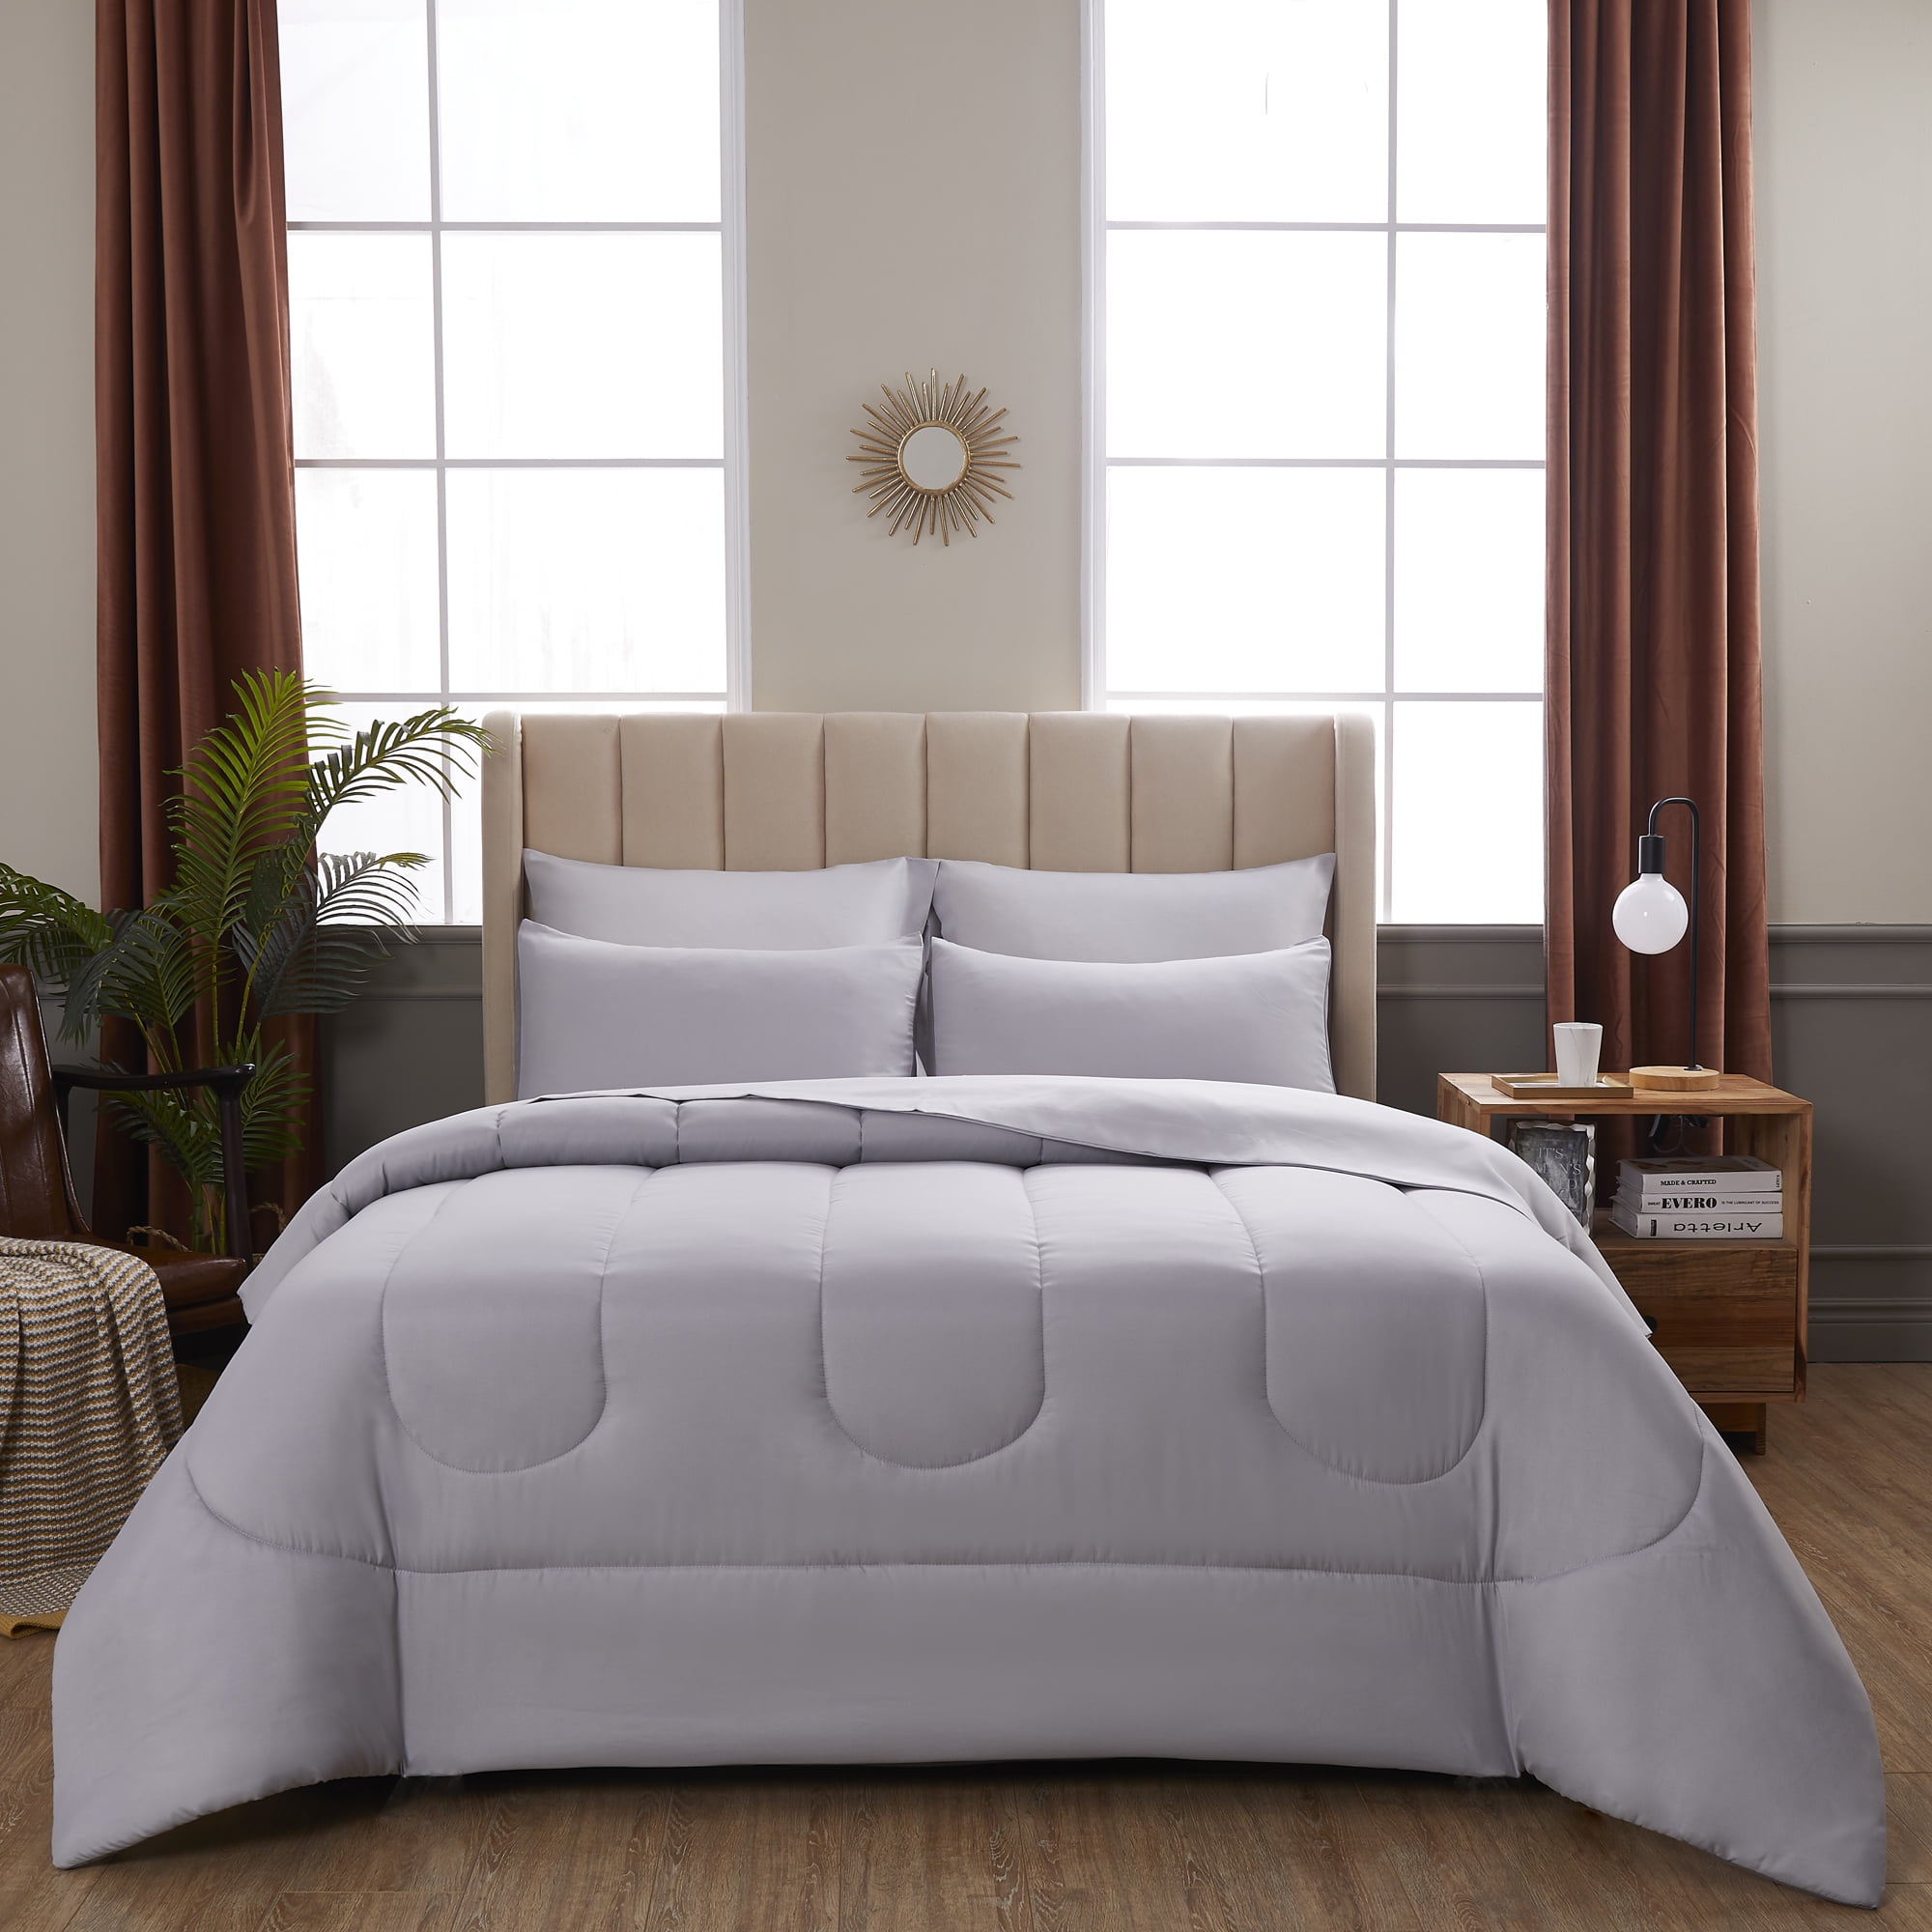 Solid Polyester Reversible Bed In, Twin Comforter Bed In A Bag